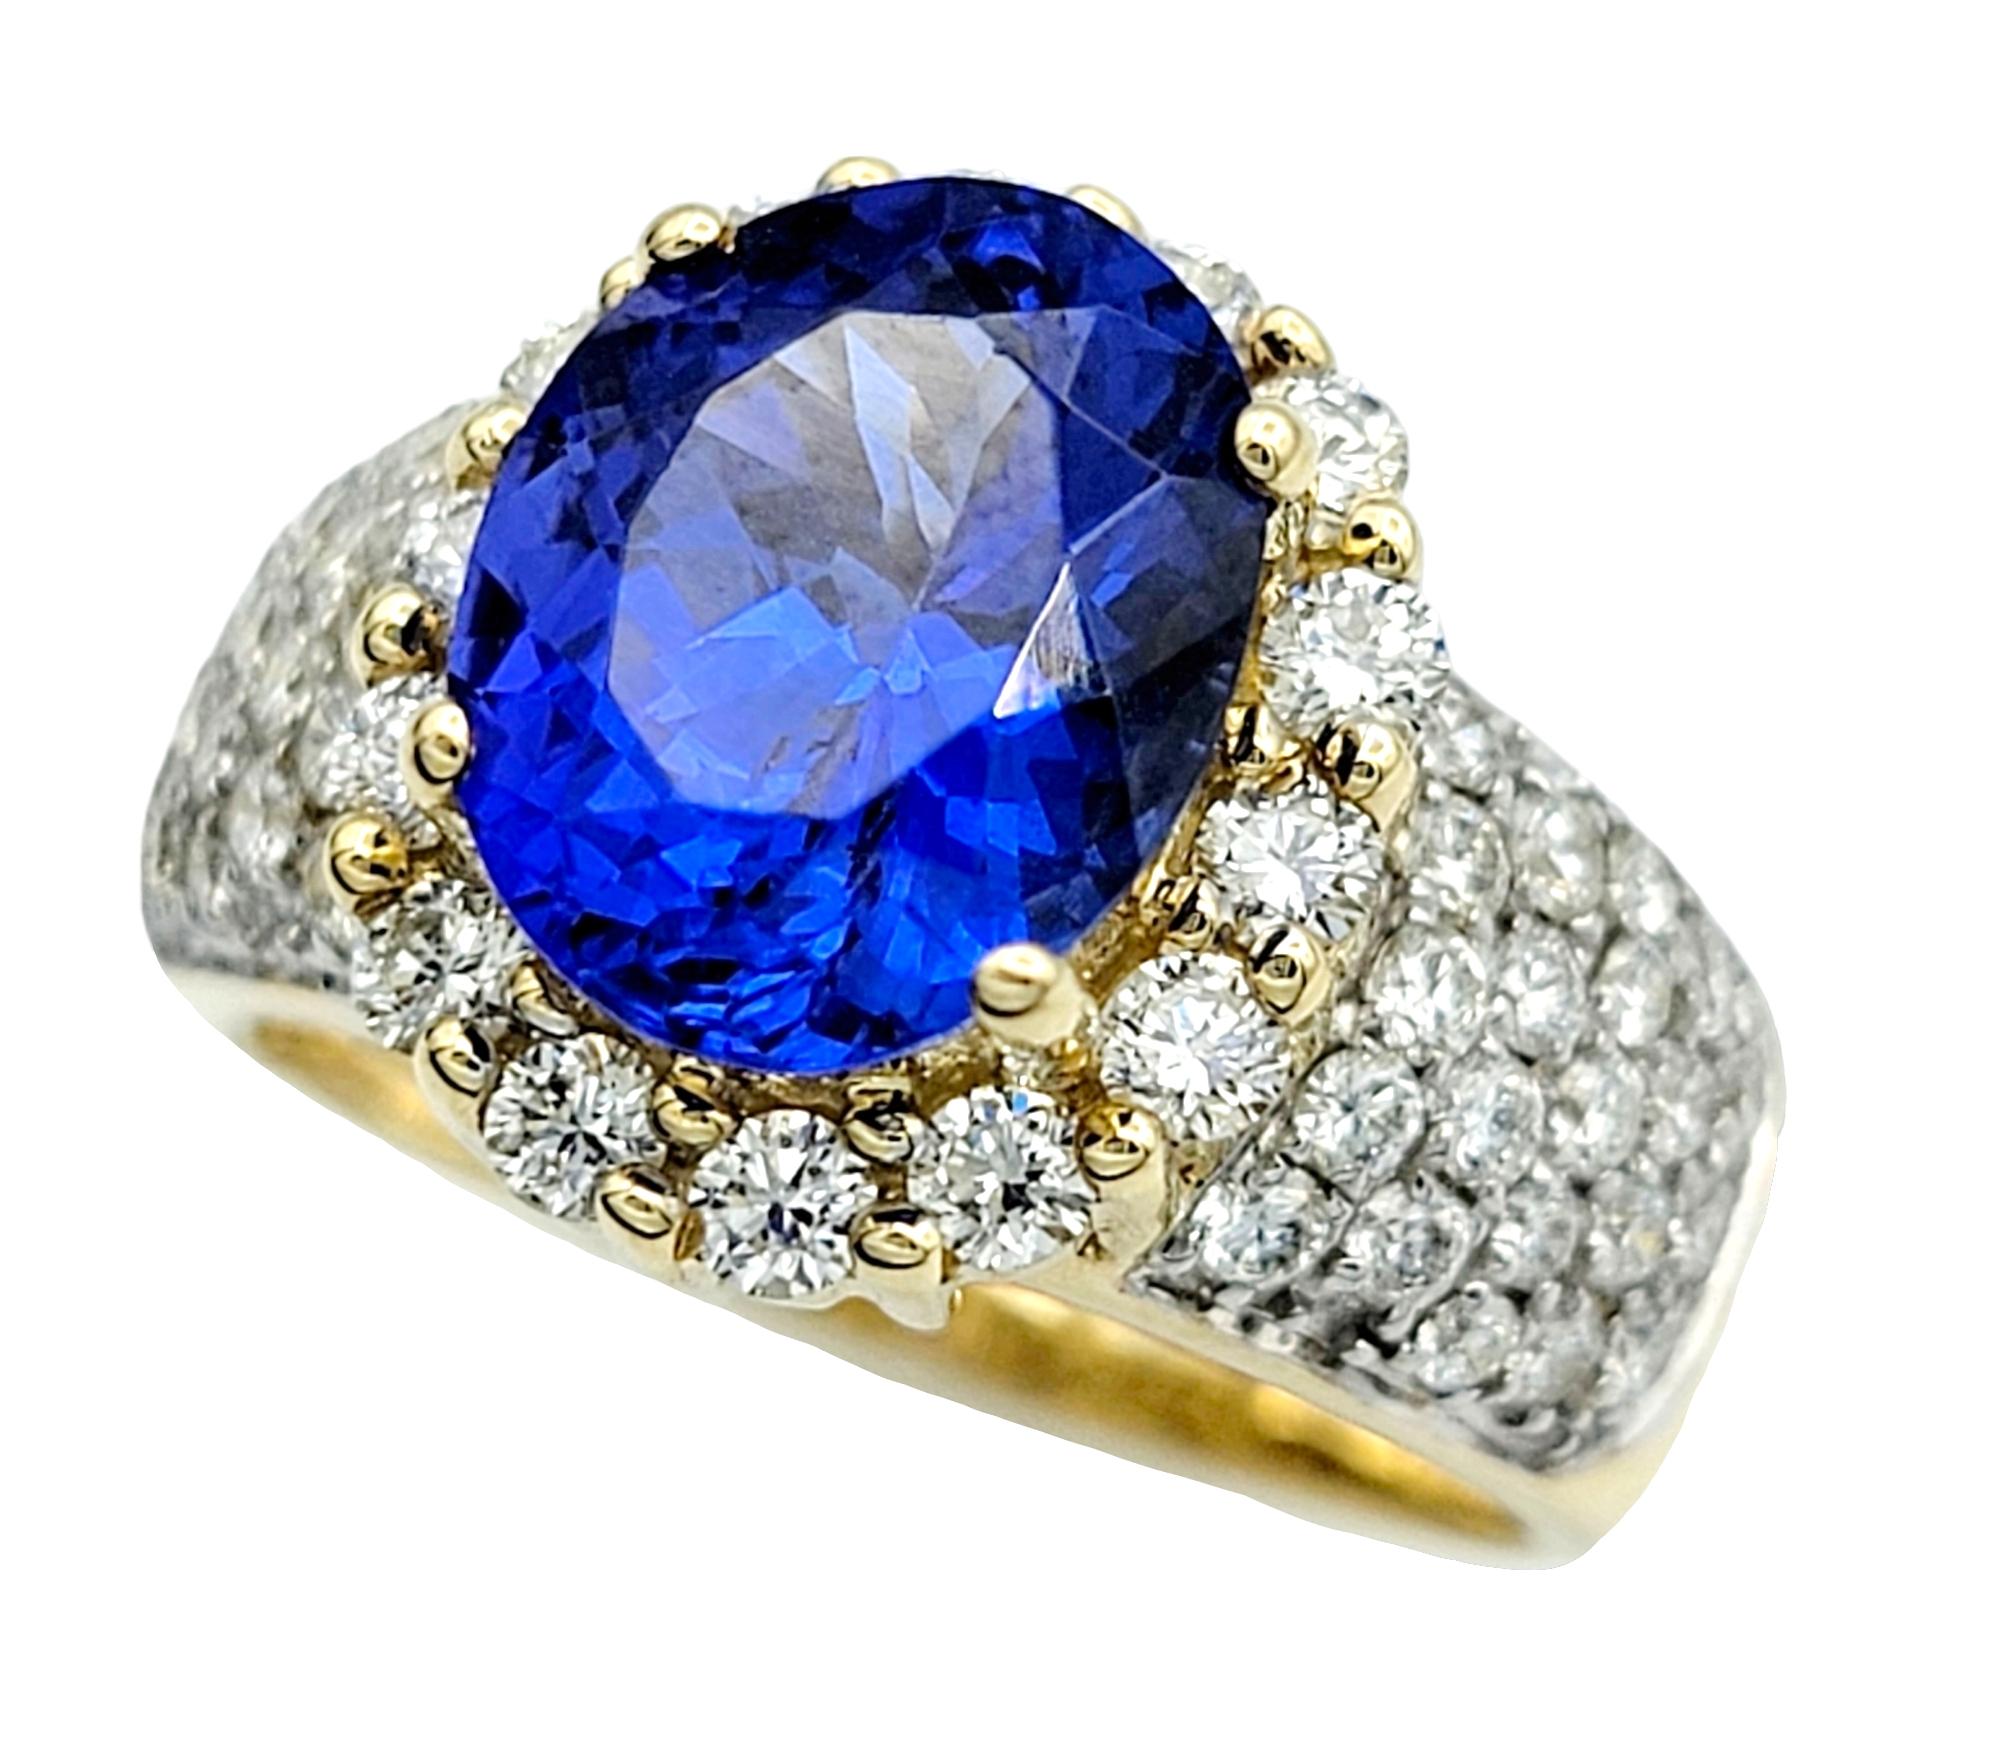 Ring Size: 7

This magnificent tanzanite ring embodies the utmost elegance and allure, with its rich color and brilliant sparkle. At its heart lies an enchanting oval-cut tanzanite, gracing the ring with a captivating deep violet hue that is nothing